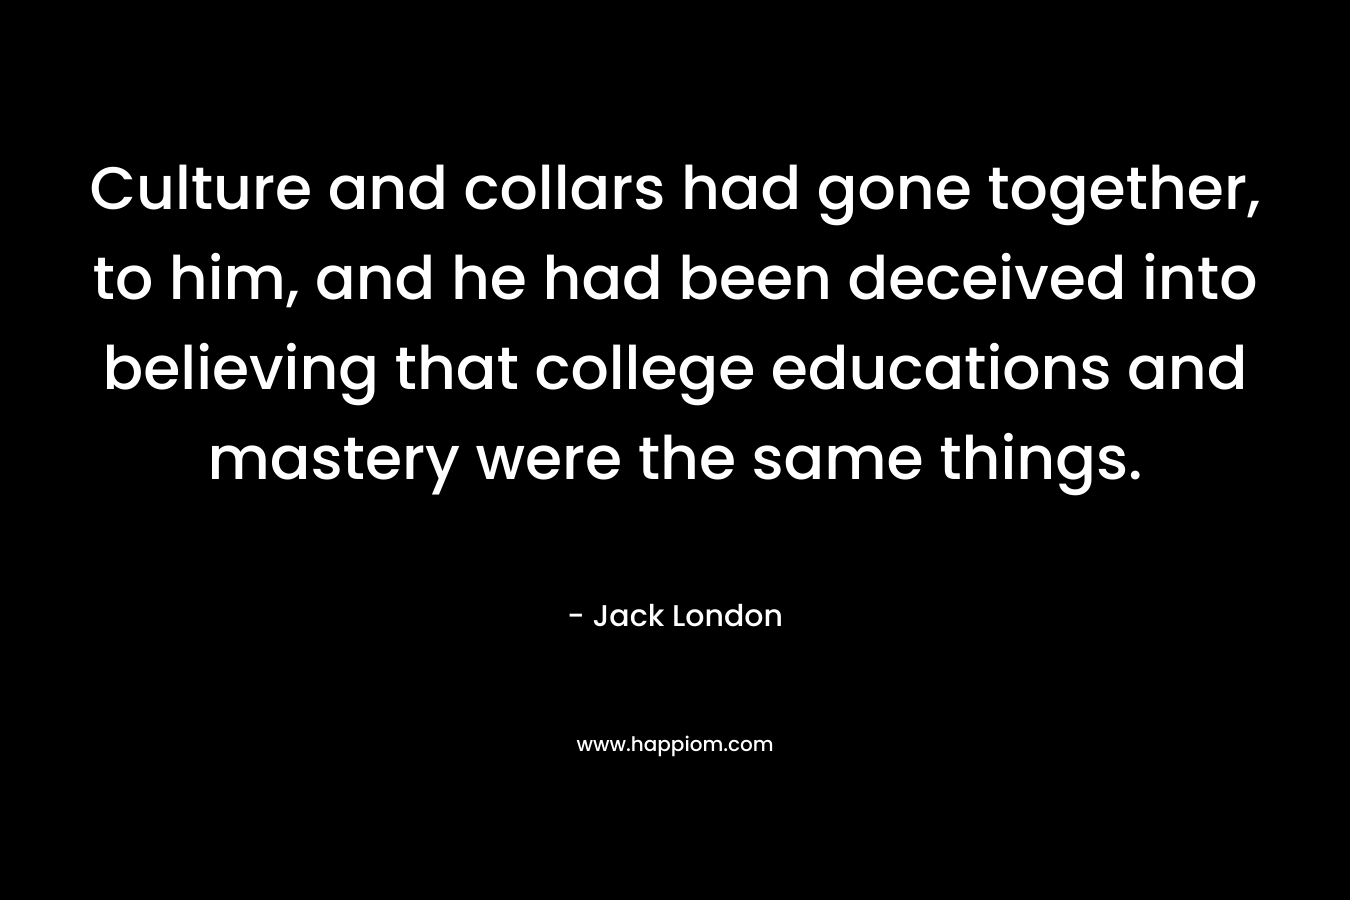 Culture and collars had gone together, to him, and he had been deceived into believing that college educations and mastery were the same things. – Jack London